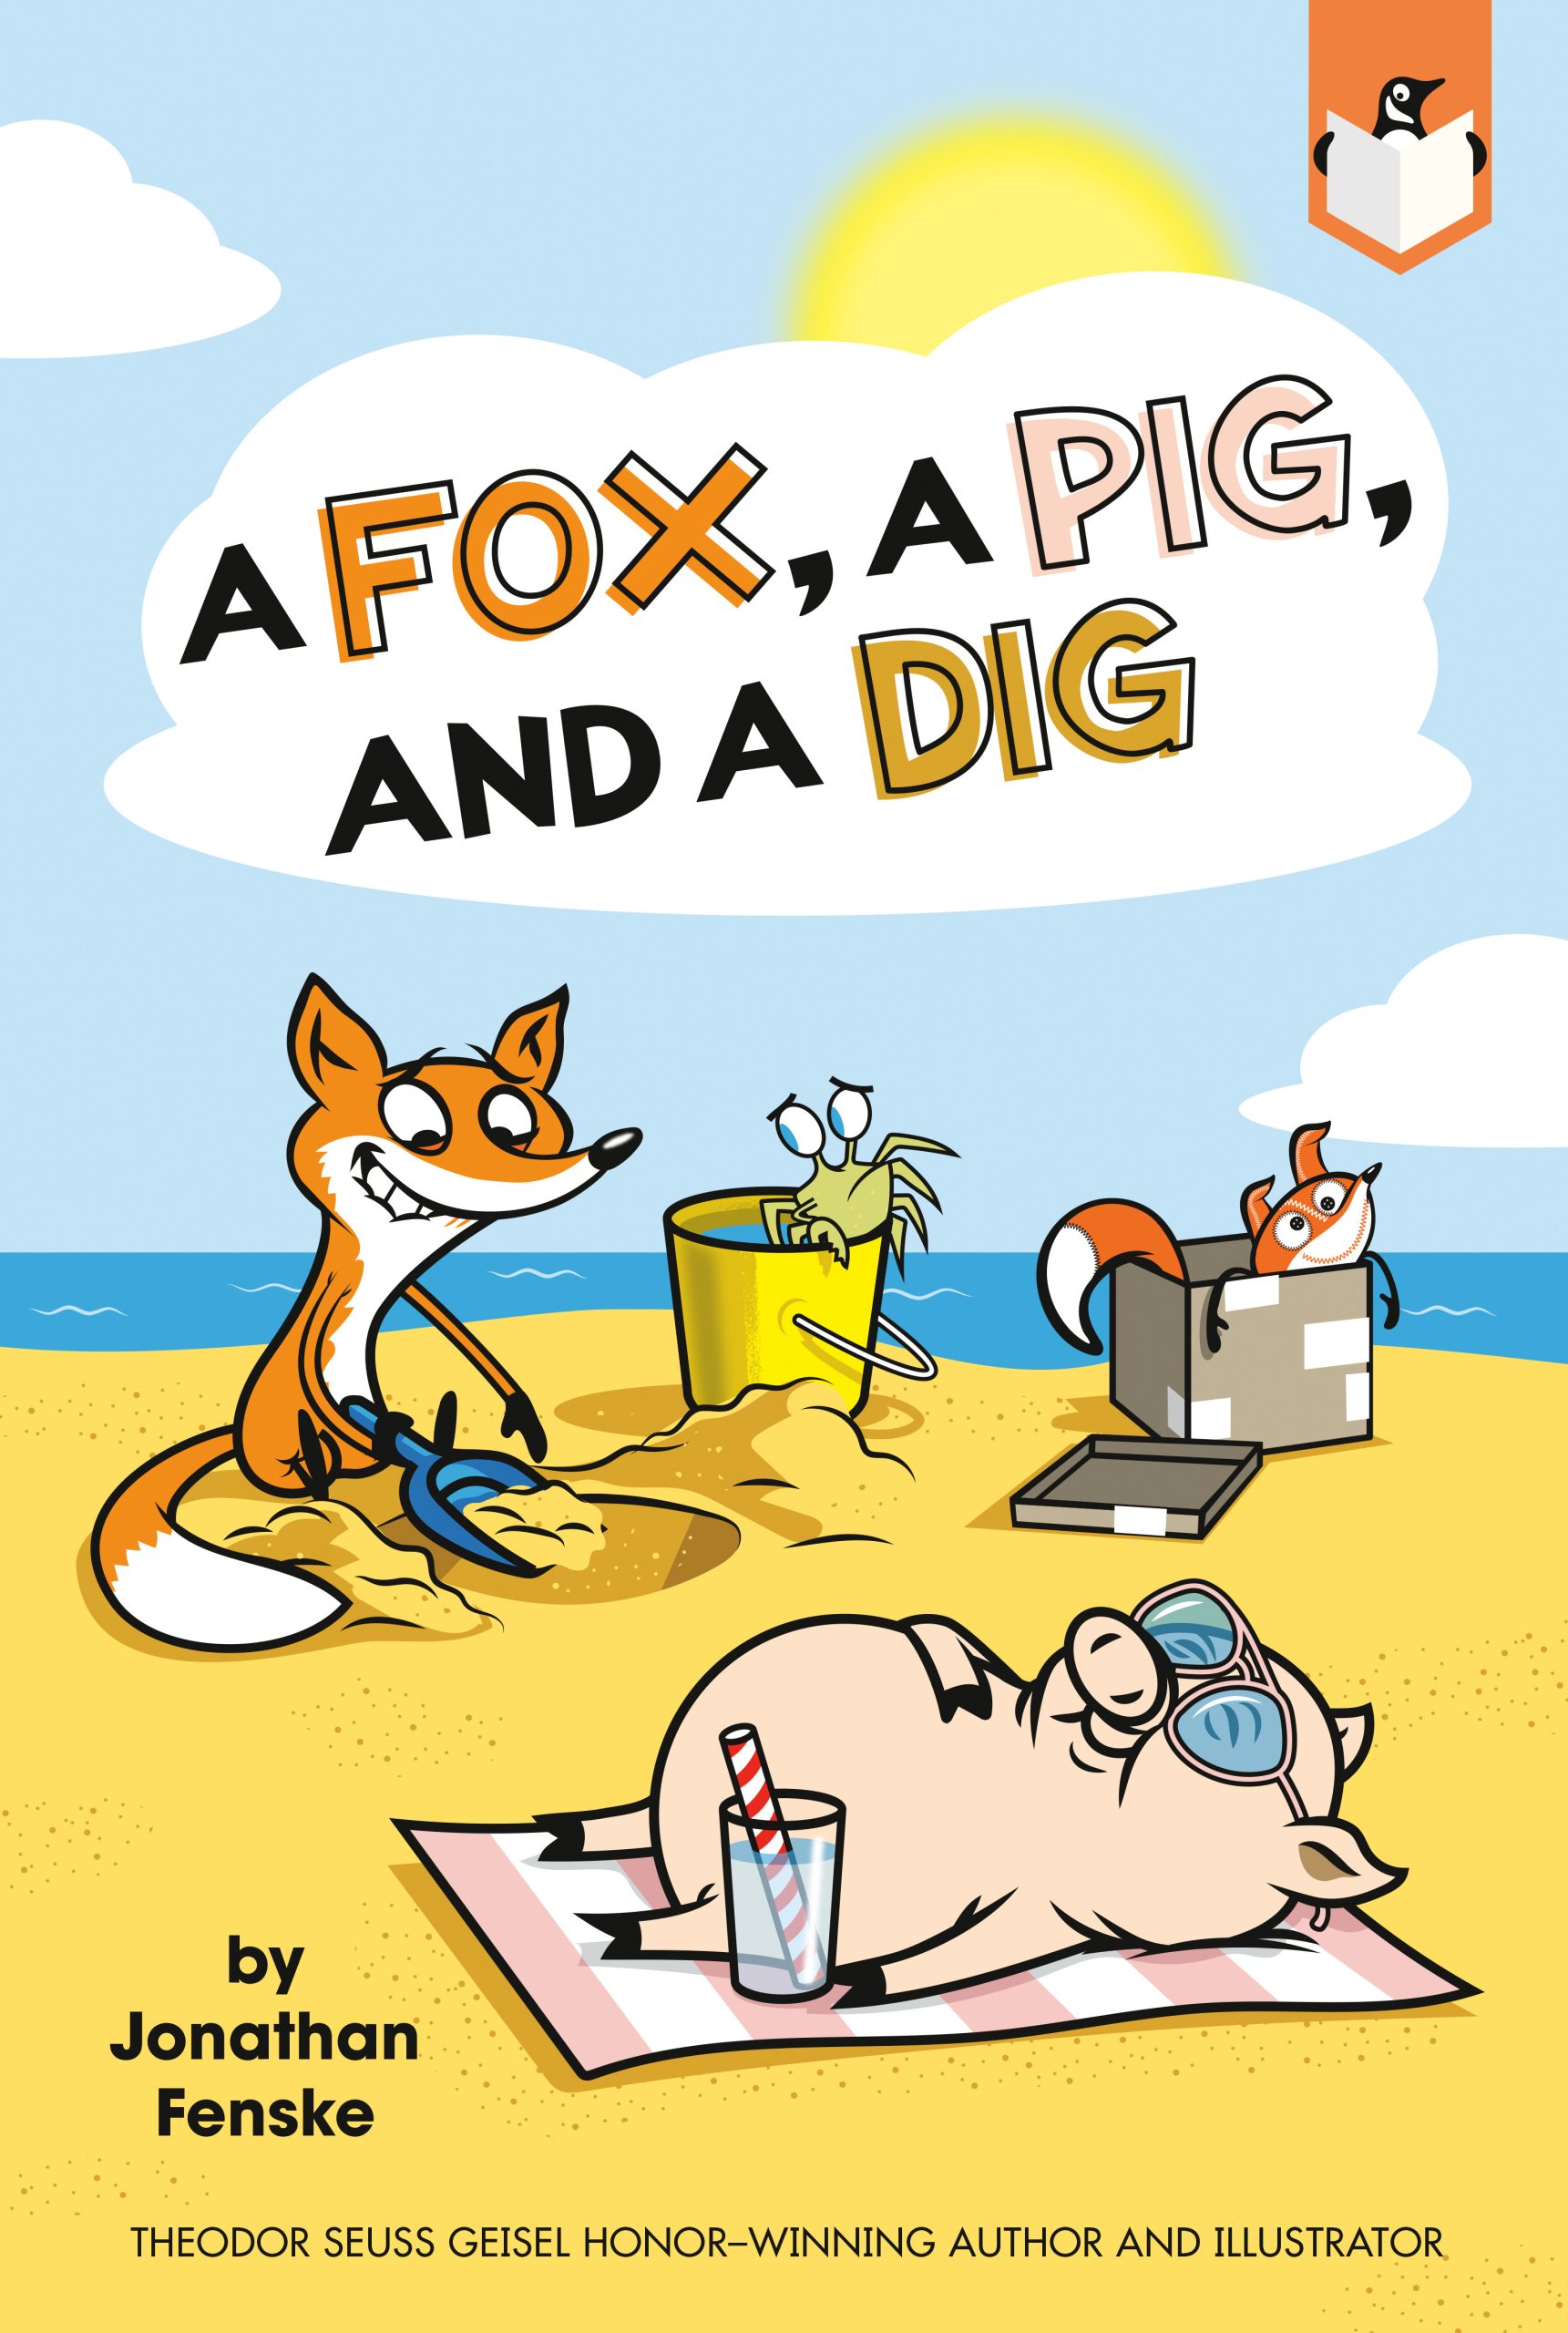 Author Chat with Jonathan Fenske (A Fox, a Pig, and a Dig), Plus Giveaway! ~ US ONLY!